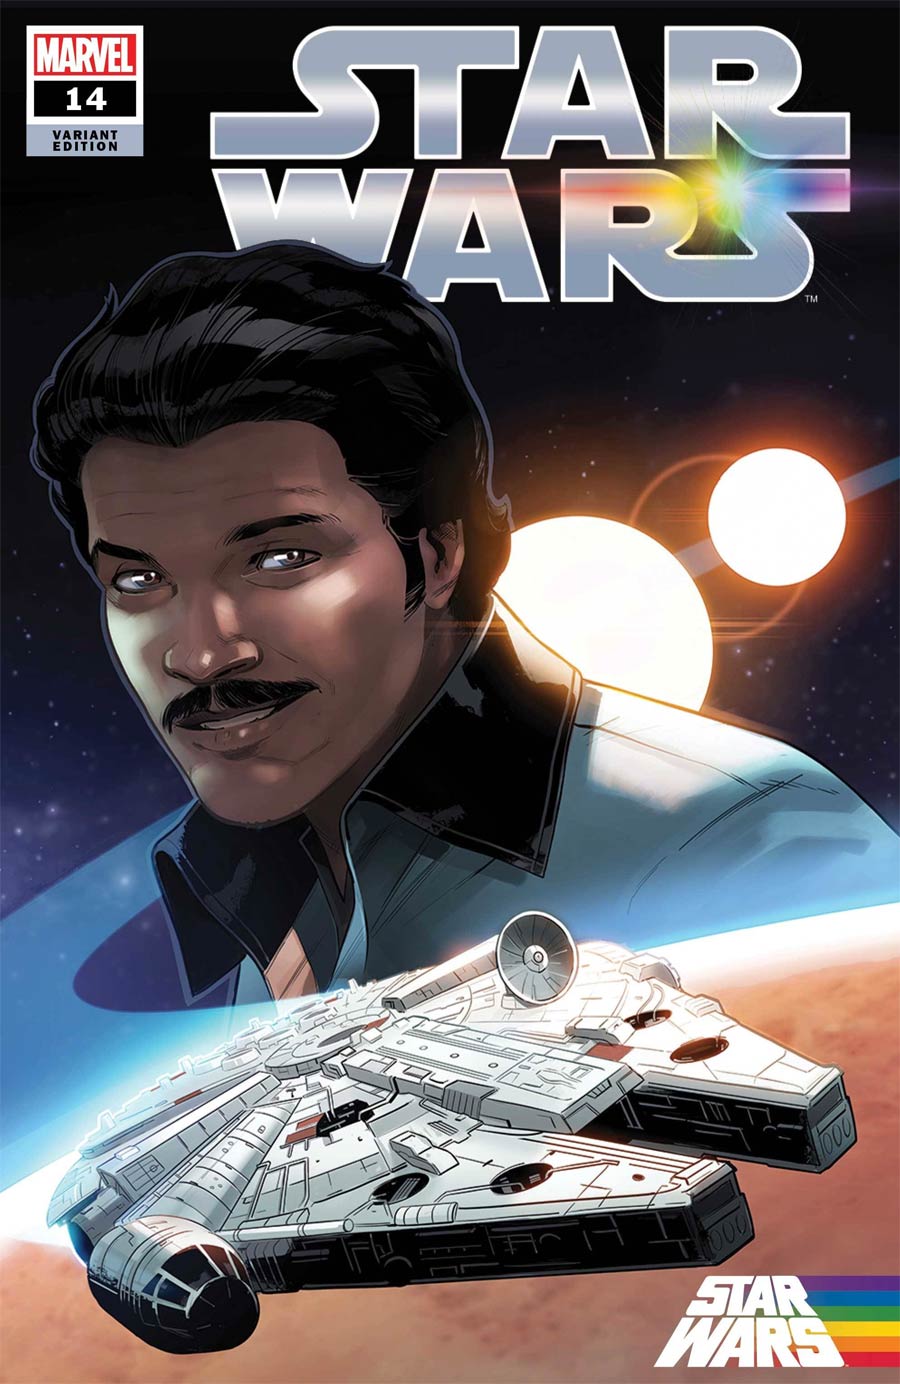 Star Wars Vol 5 #14 Cover B Variant Stephen Byrne Pride Cover (War Of The Bounty Hunters Tie-In)